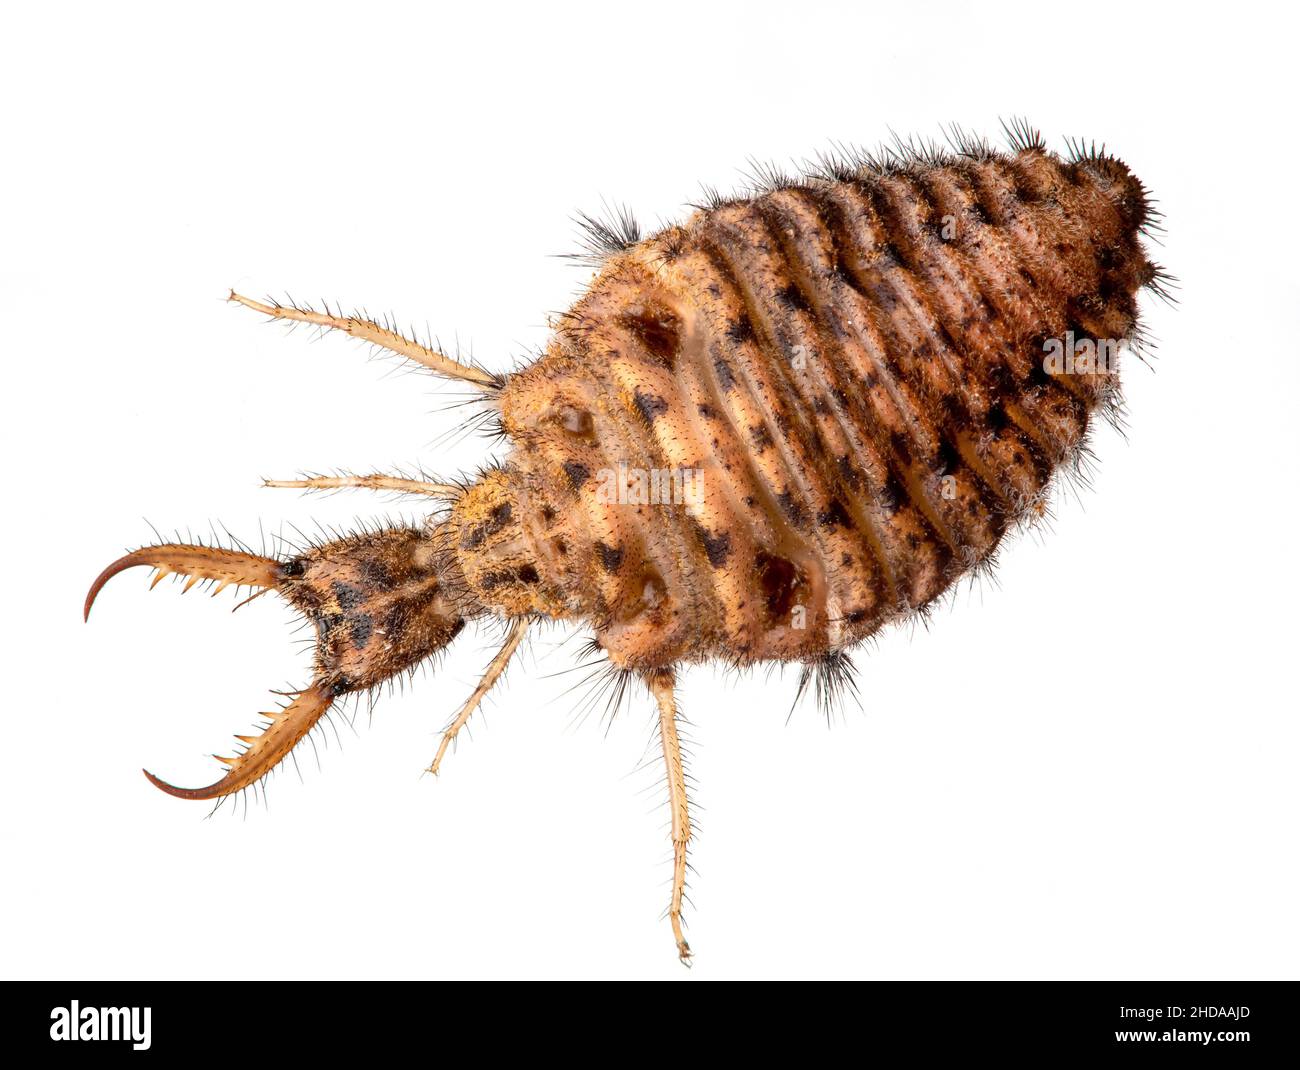 ant lion, Brachynemurus ferox, from above, isolated, cECP 2018 Stock Photo